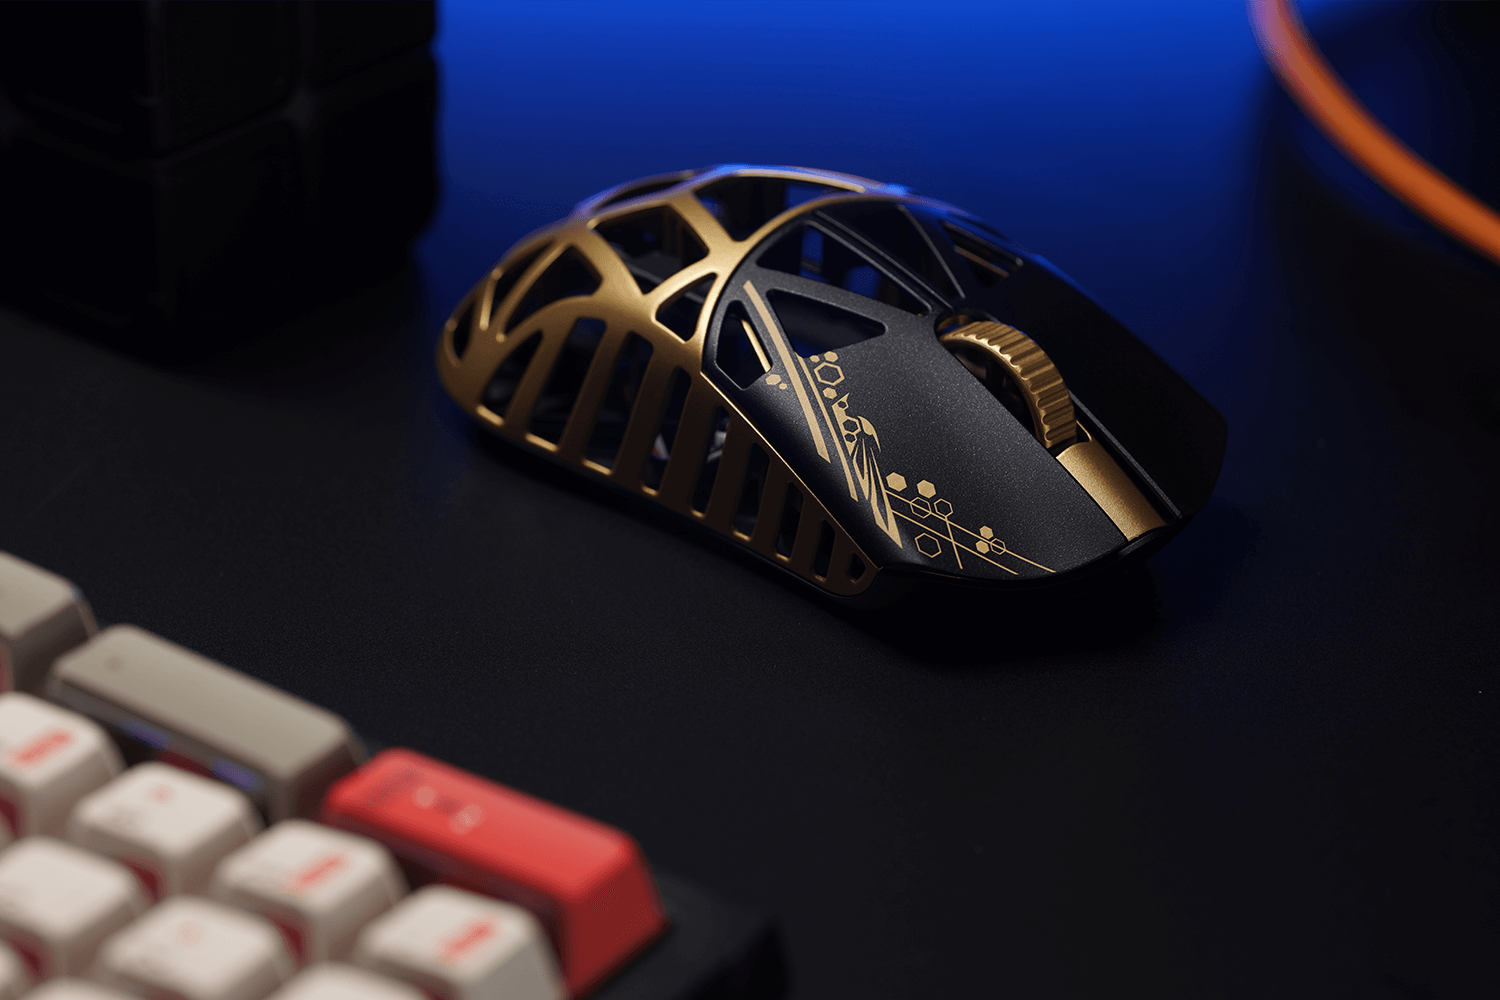 Wlmouse BEAST X Wireless Gaming Mouse